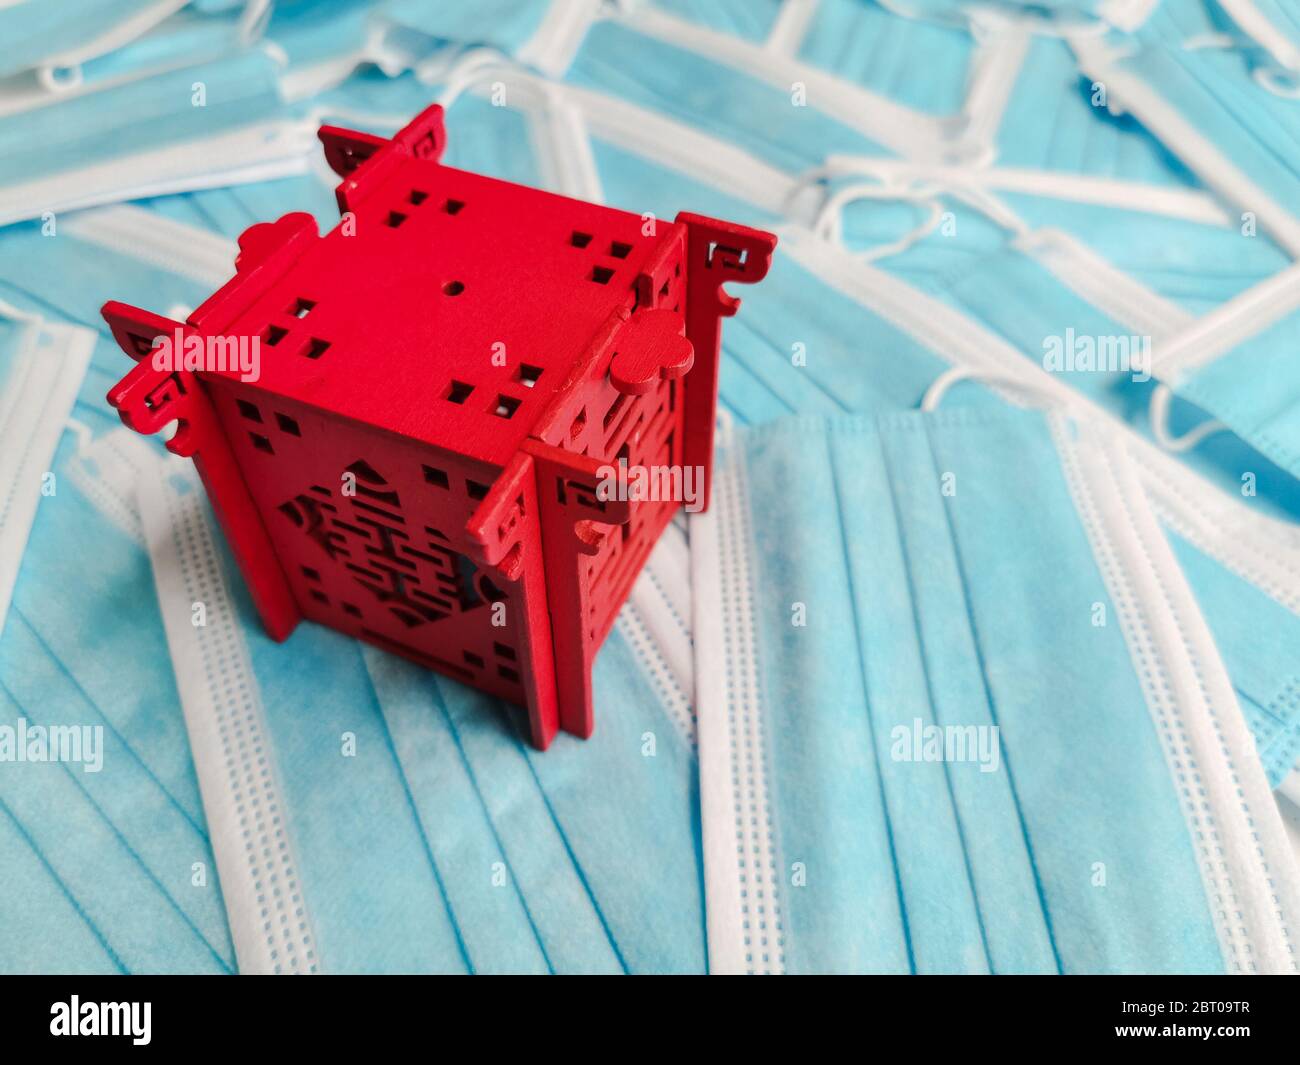 Red miniature pavilion representing China on a background of blue disposable surgical masks Stock Photo